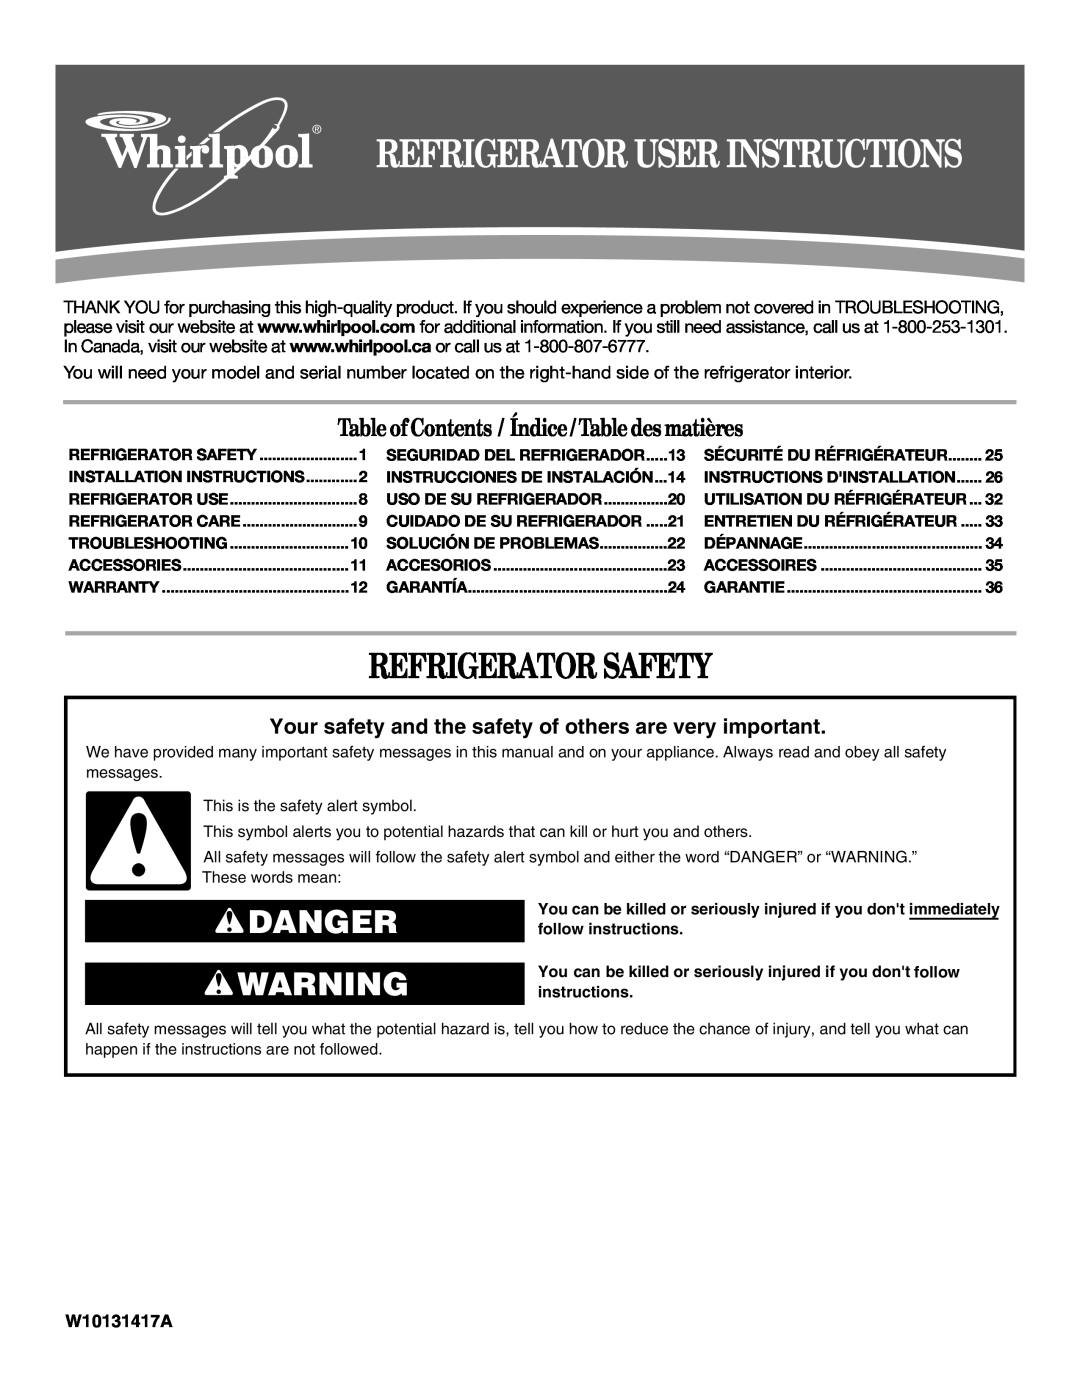 Whirlpool W10131417A installation instructions Refrigerator Safety, Danger, Table ofContents / Índice / Table des matières 